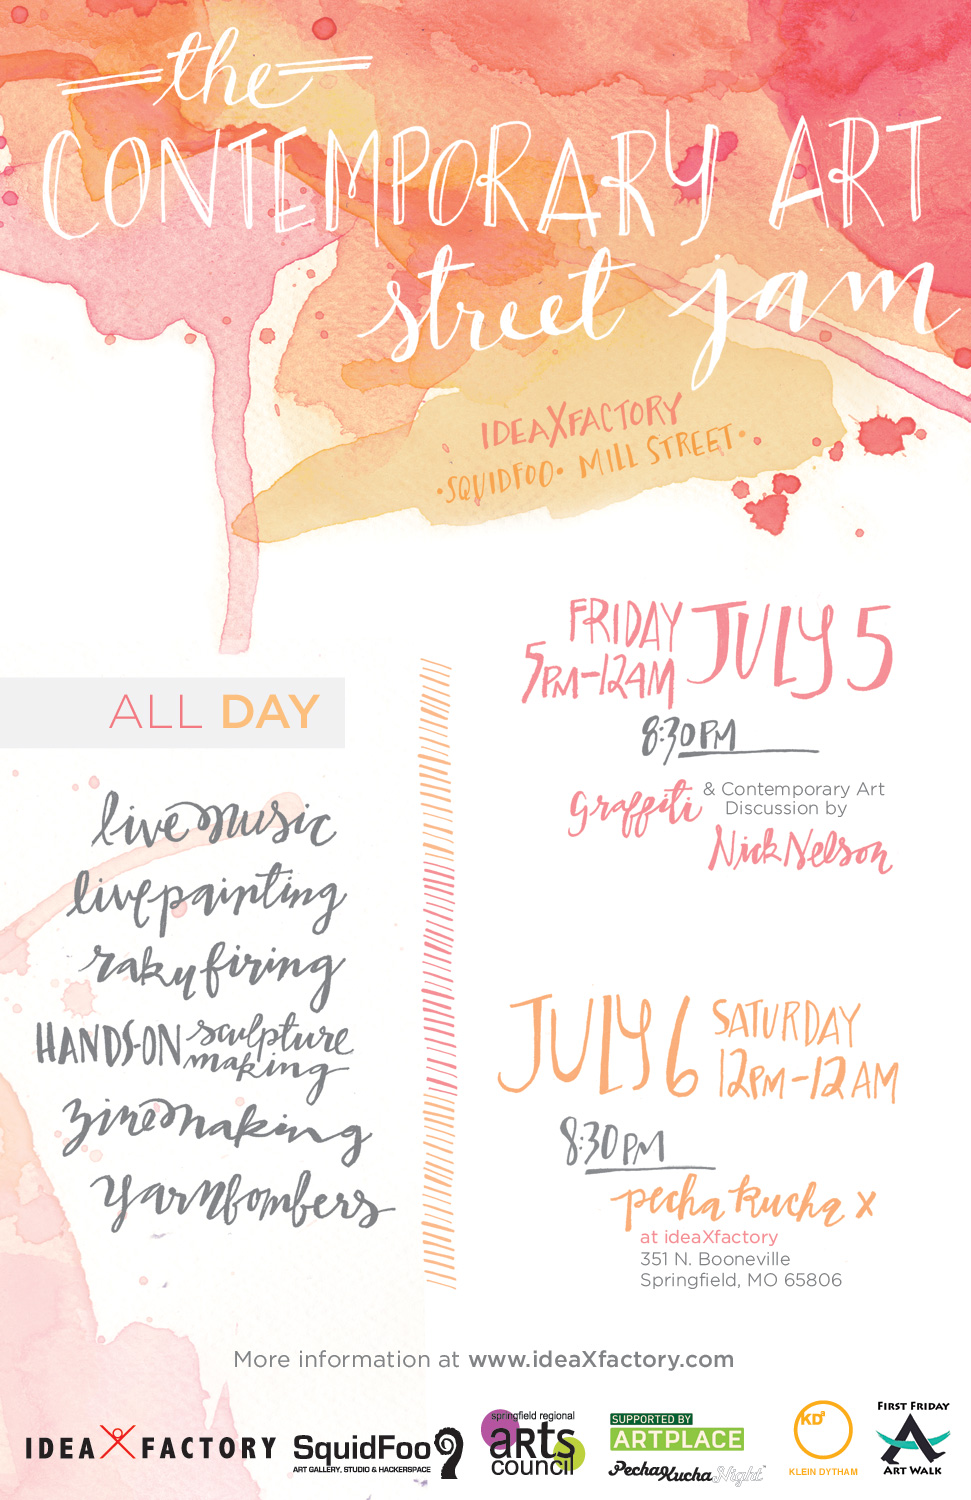 Contemporary Art Street Jam coming soon on July 5-6